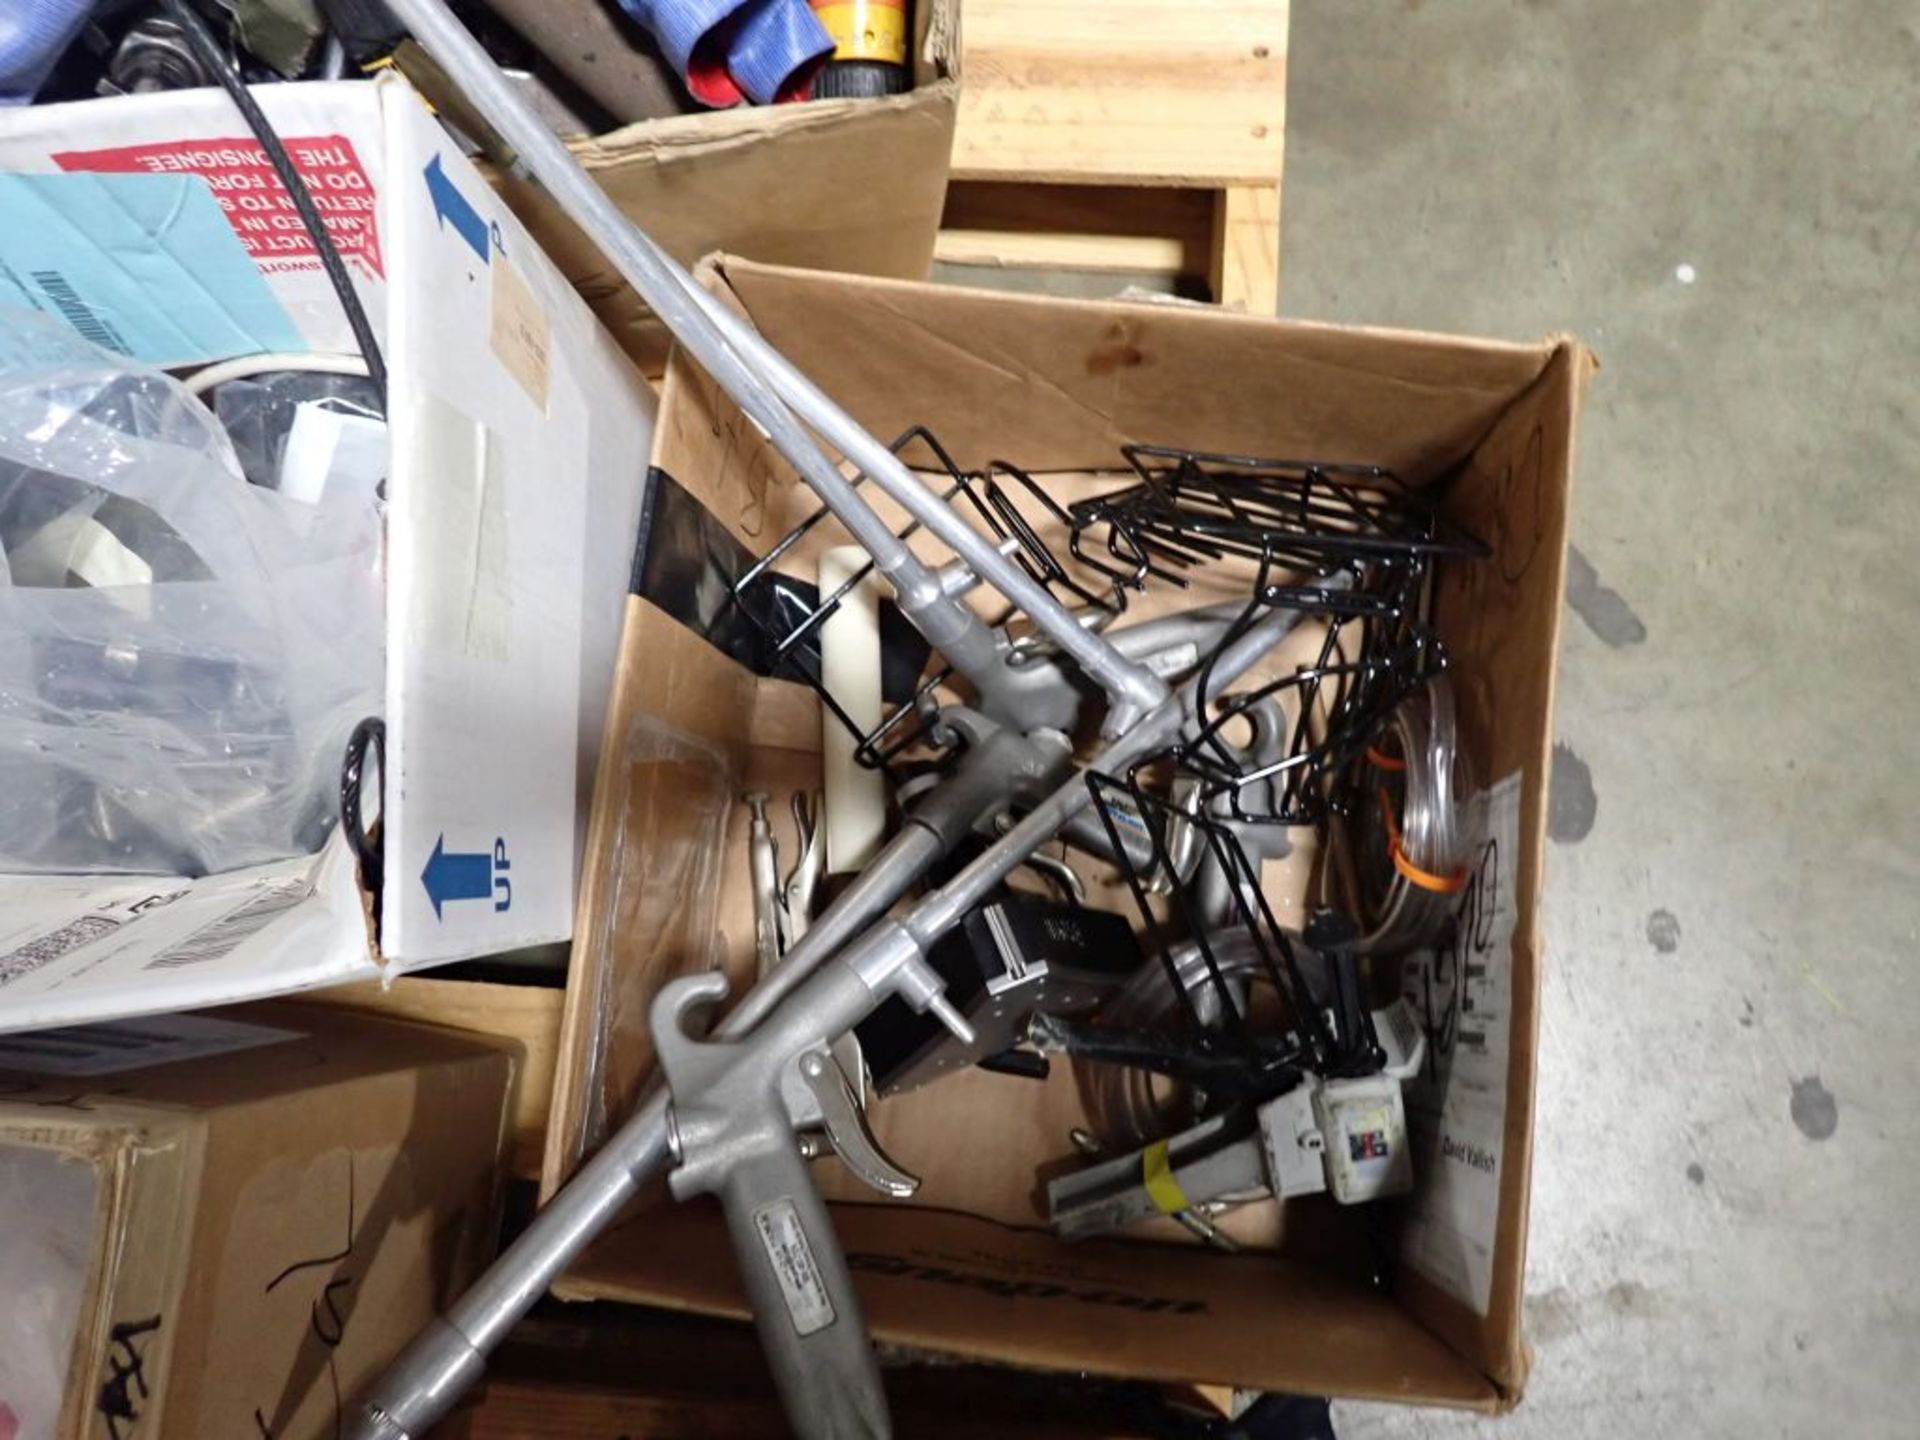 Lot of Assorted Tools | Tag: 241476 | Limited Forklift Assistance Available - $10.00 Lot Loading - Image 6 of 8